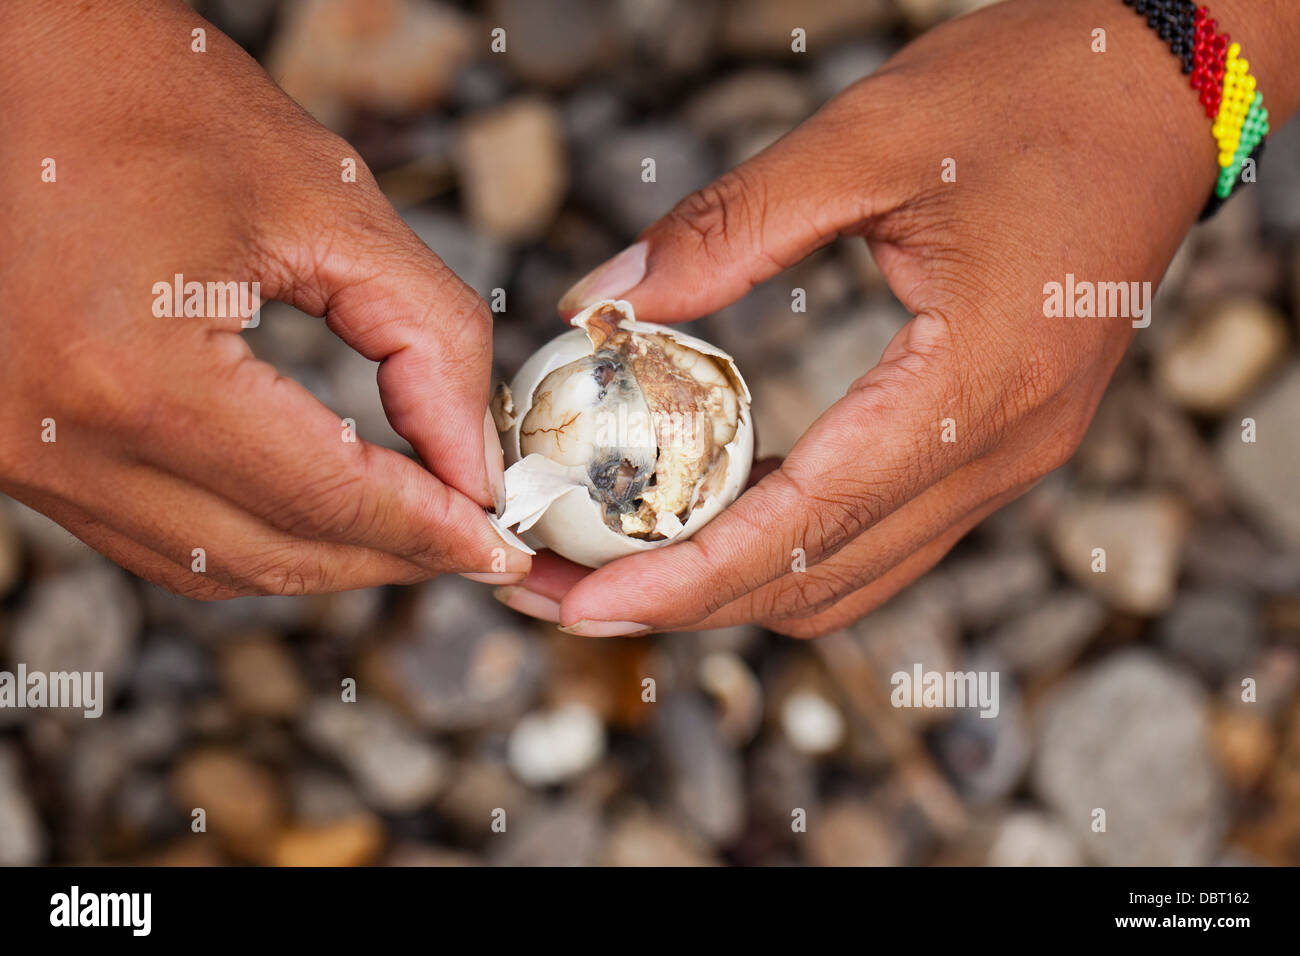 A Filipino opens a balut, or fertilized duck egg, before eating the unique Pinoy snack in Oriental Mindoro, Philippines. Stock Photo